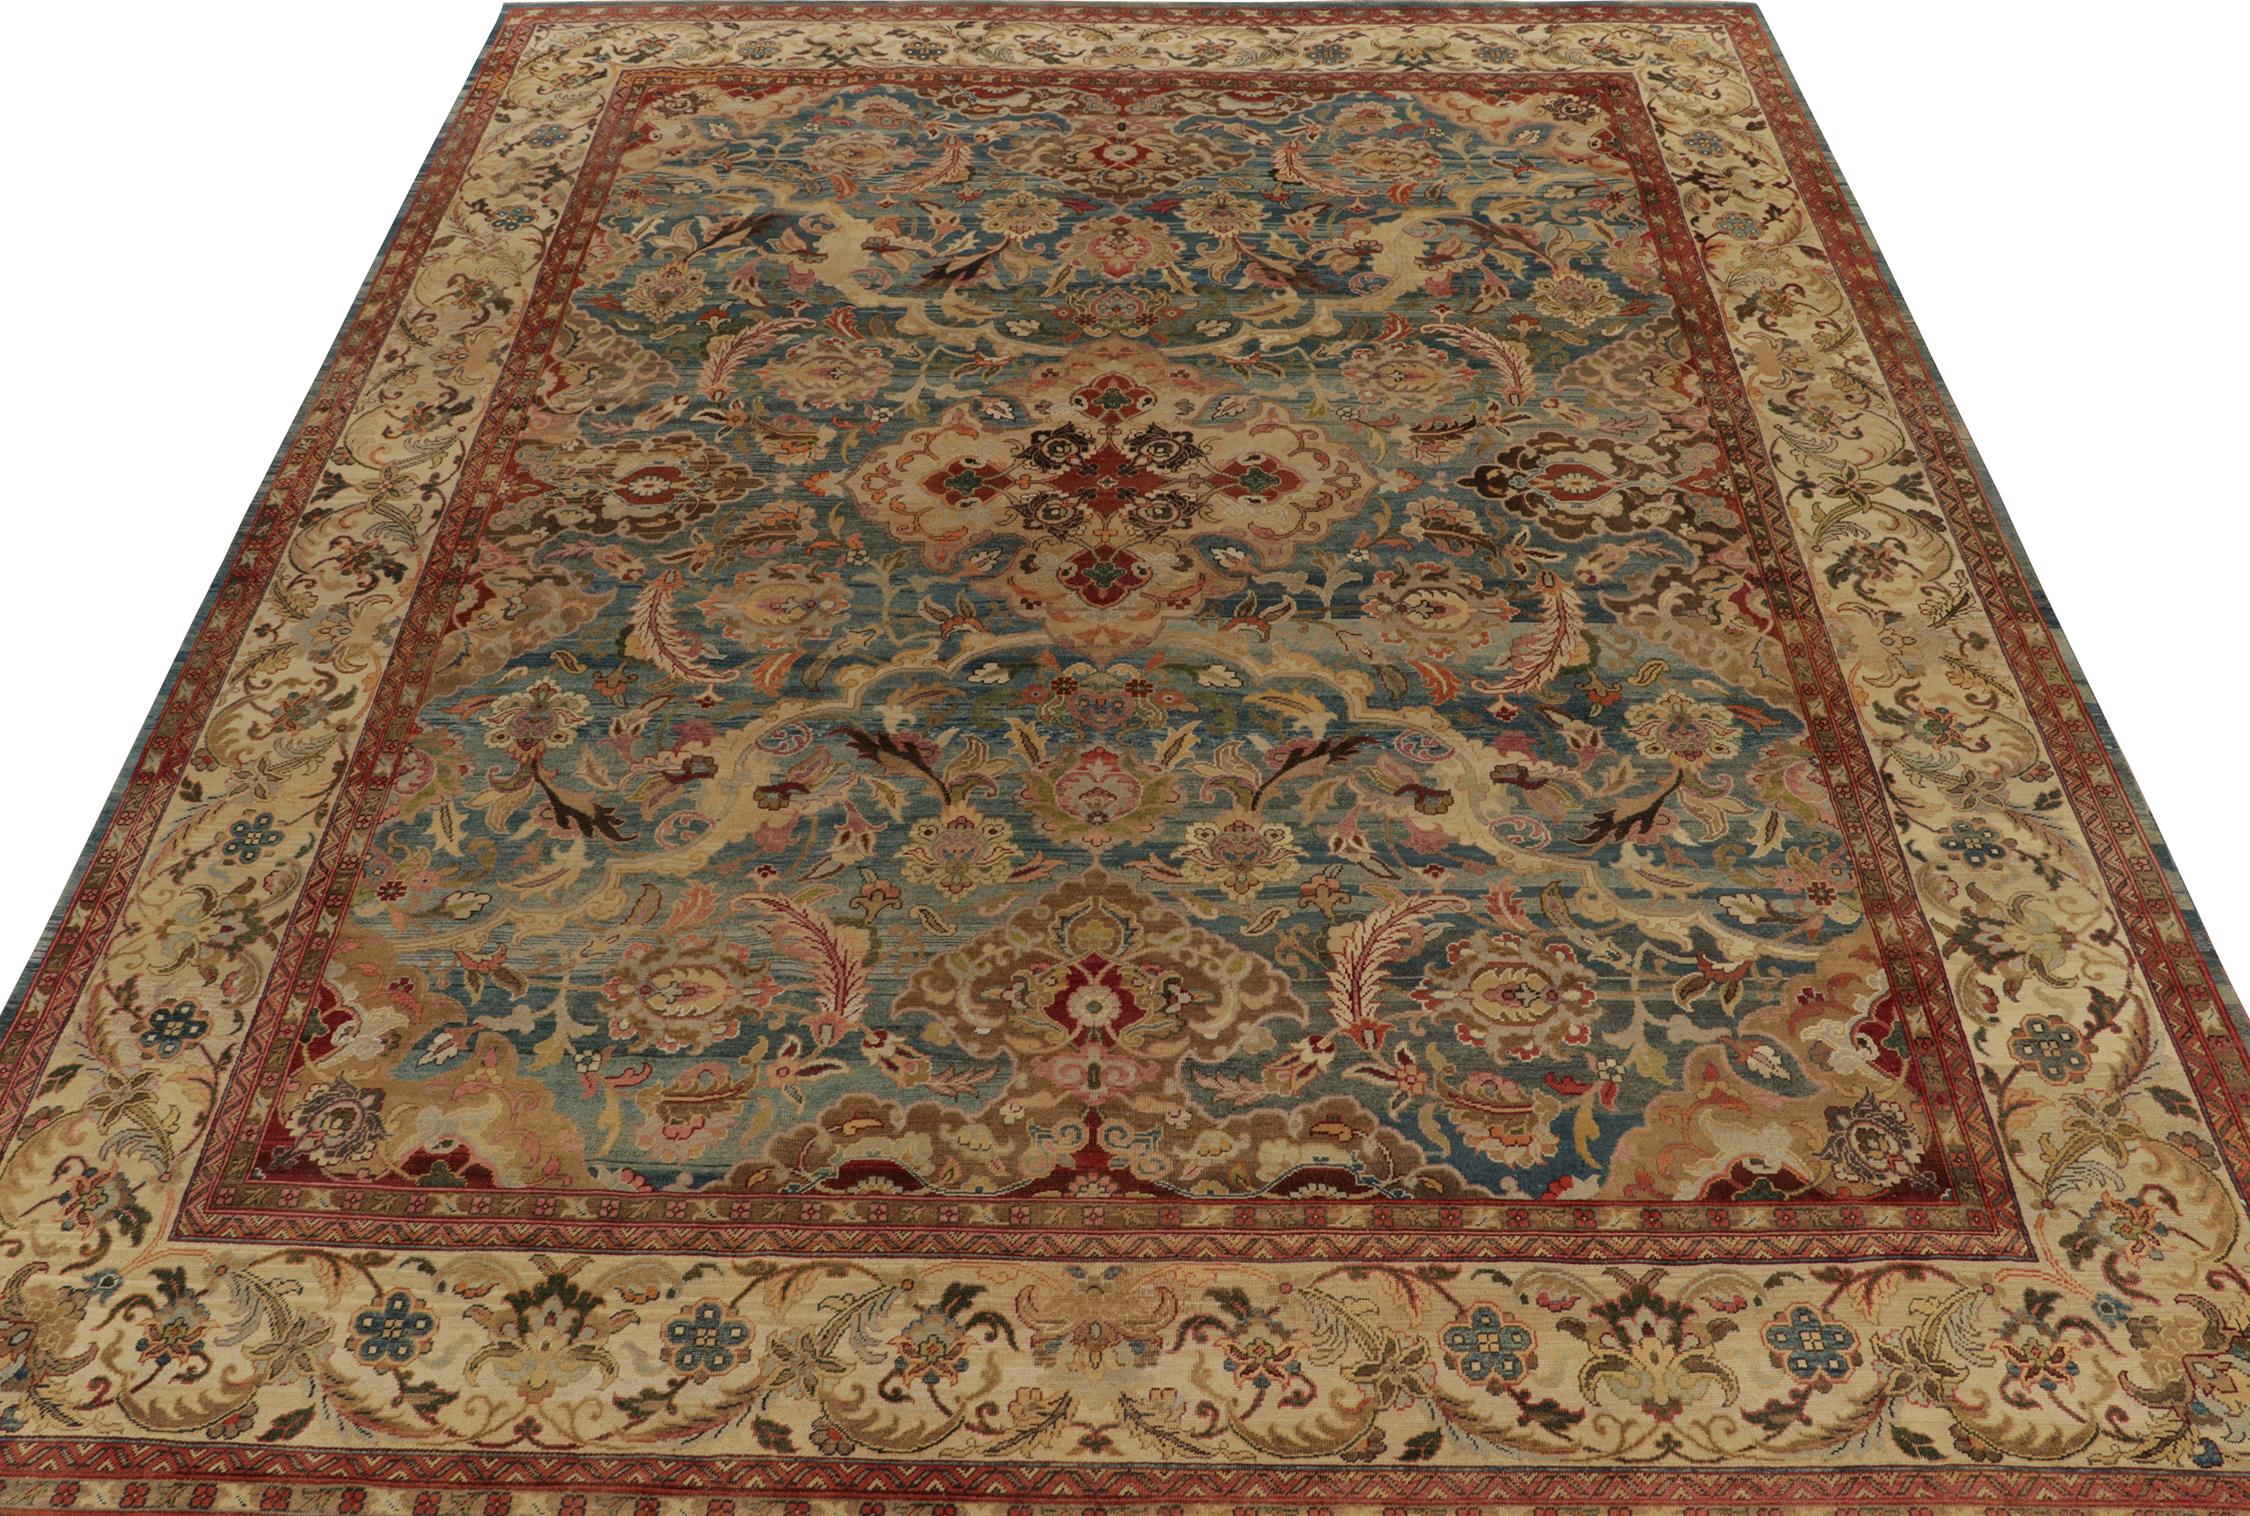 Tabriz Rug & Kilim’s Classic Persian style rug in Blue and Beige-Brown Floral Patterns For Sale